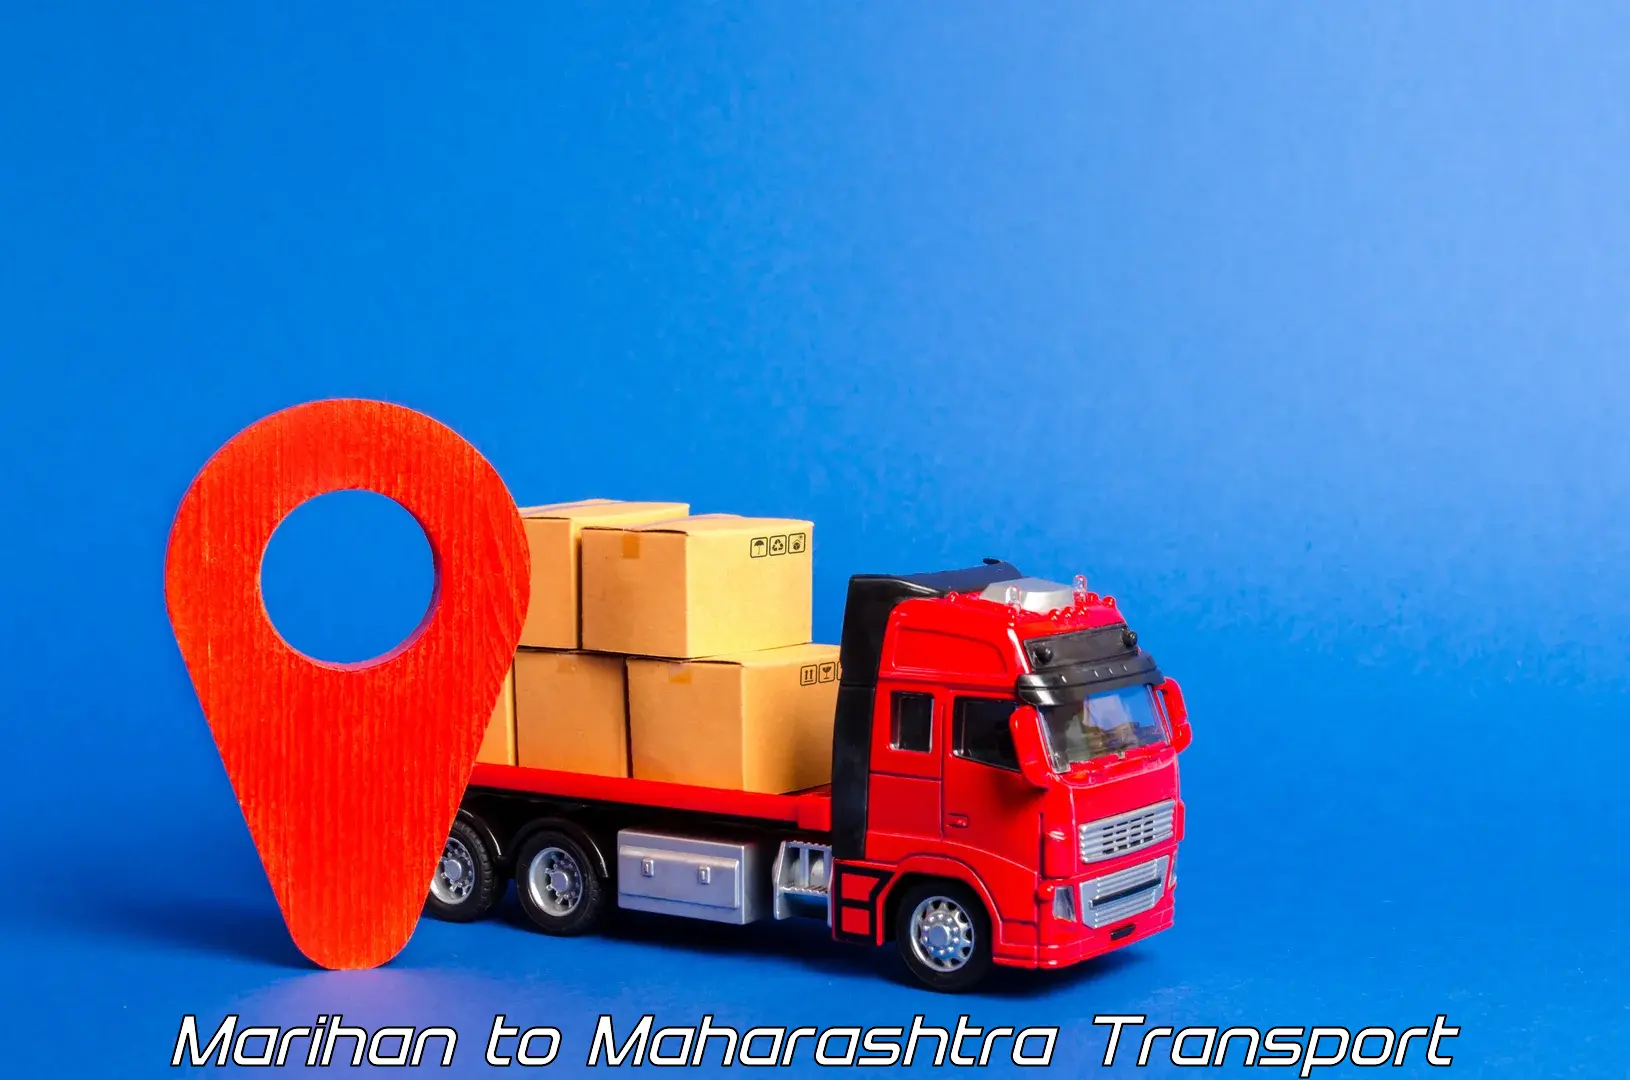 Domestic transport services Marihan to Loha Nanded